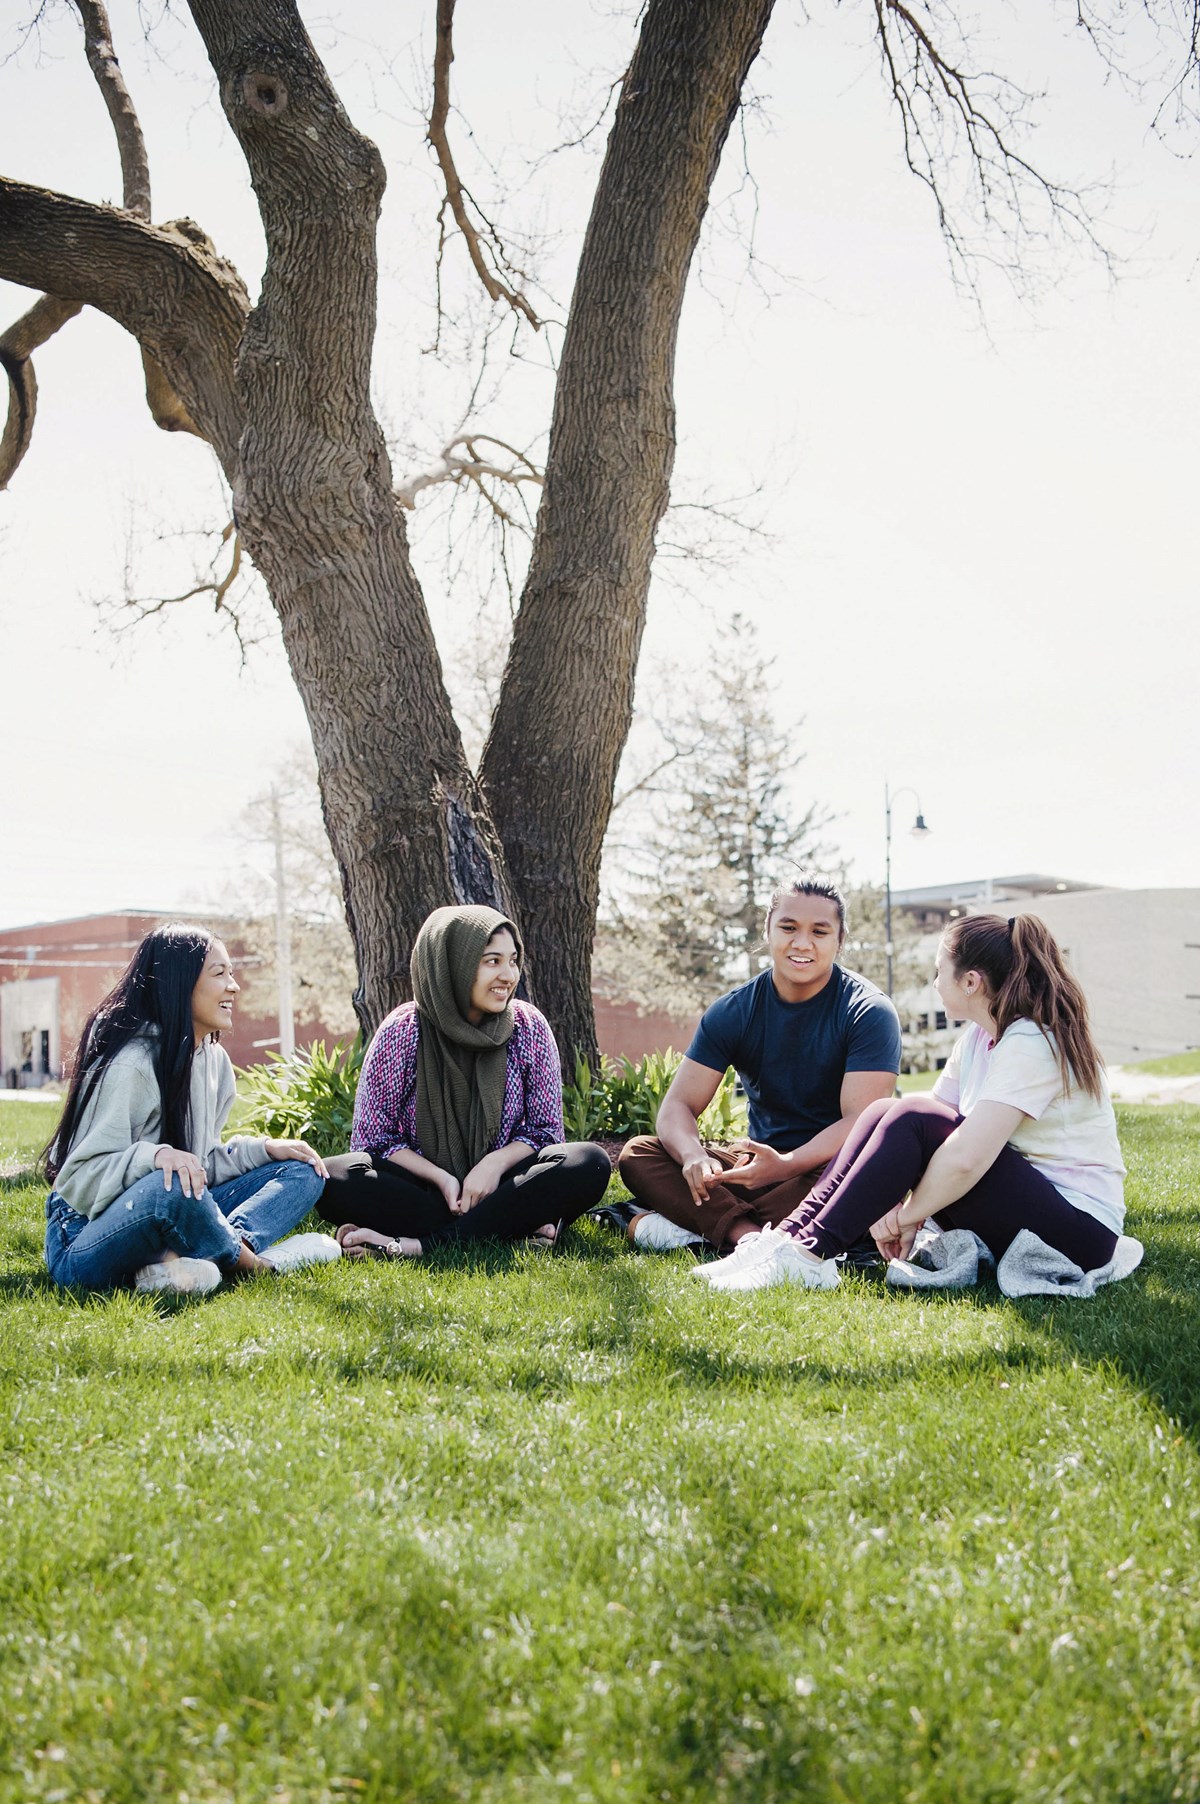 Students sit together in a group under a tree on South Campus.